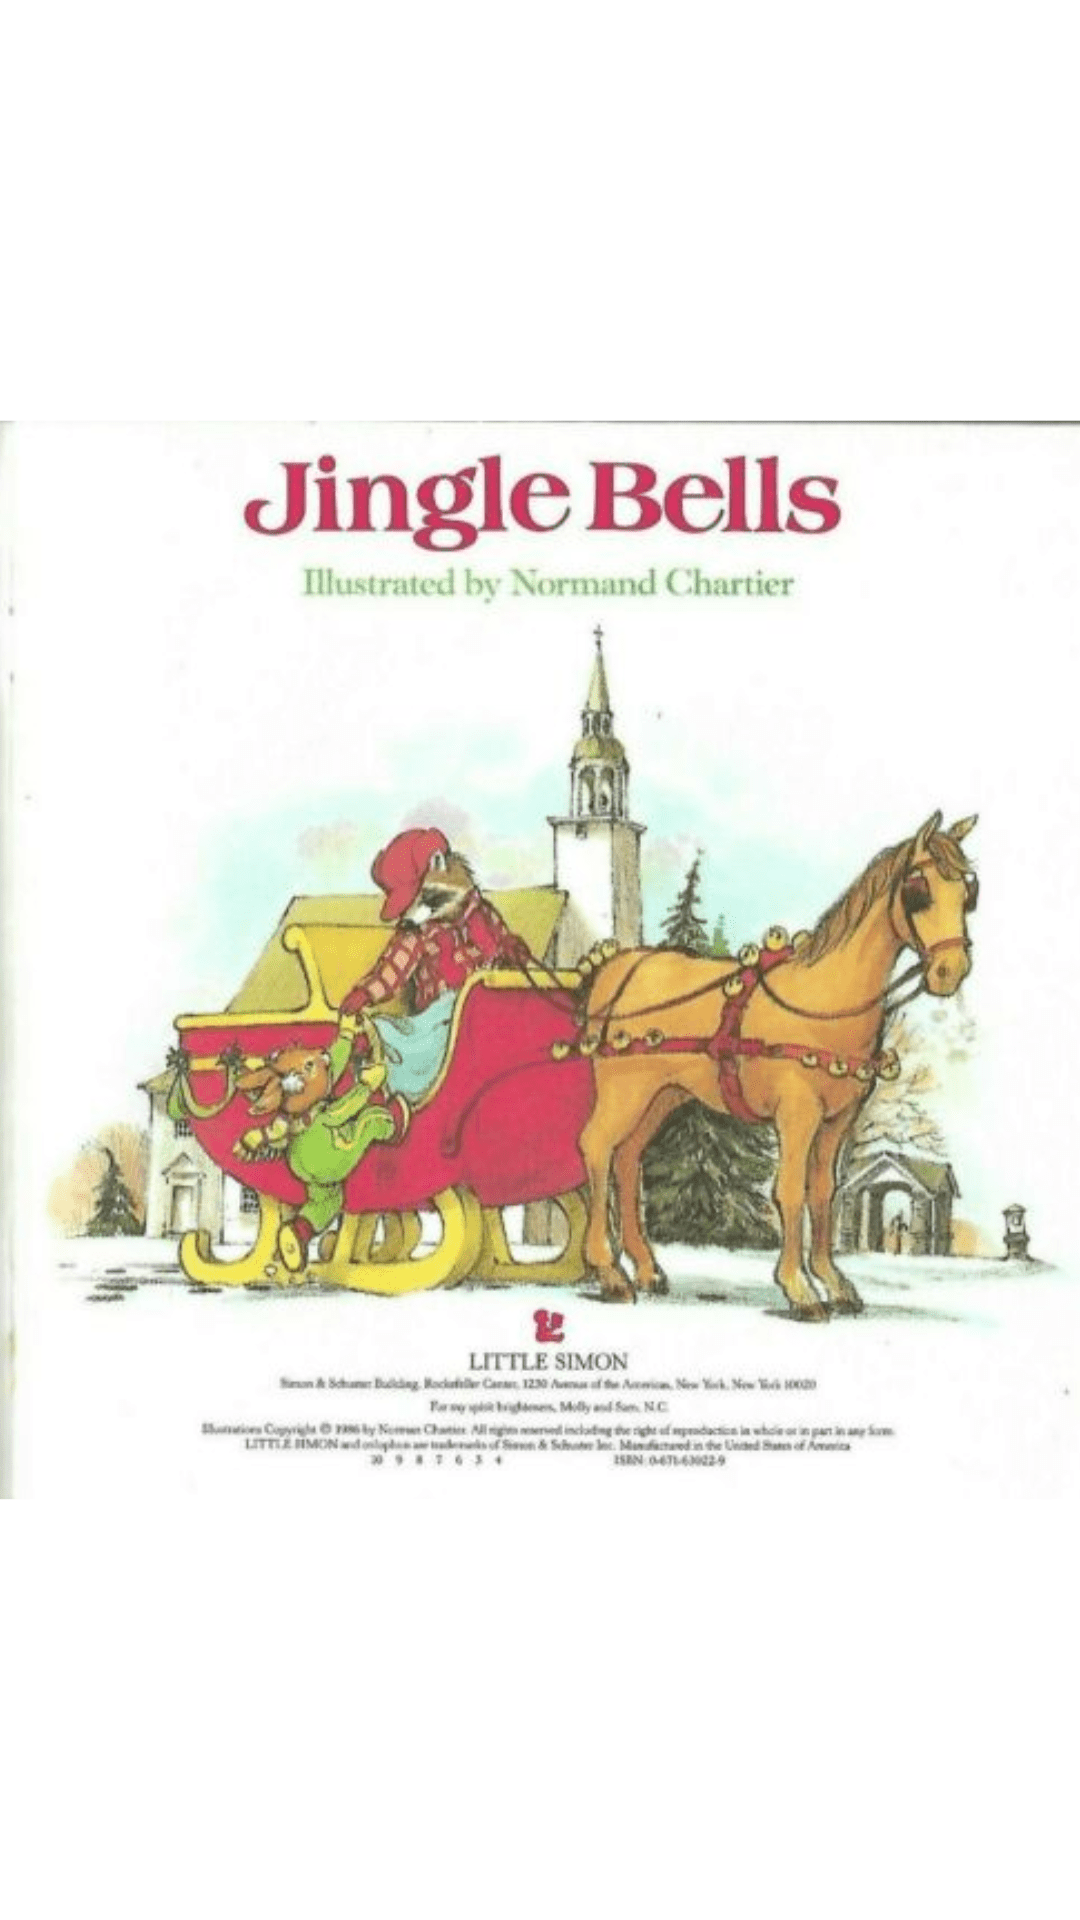 Jingle Bells by Normand Chartier